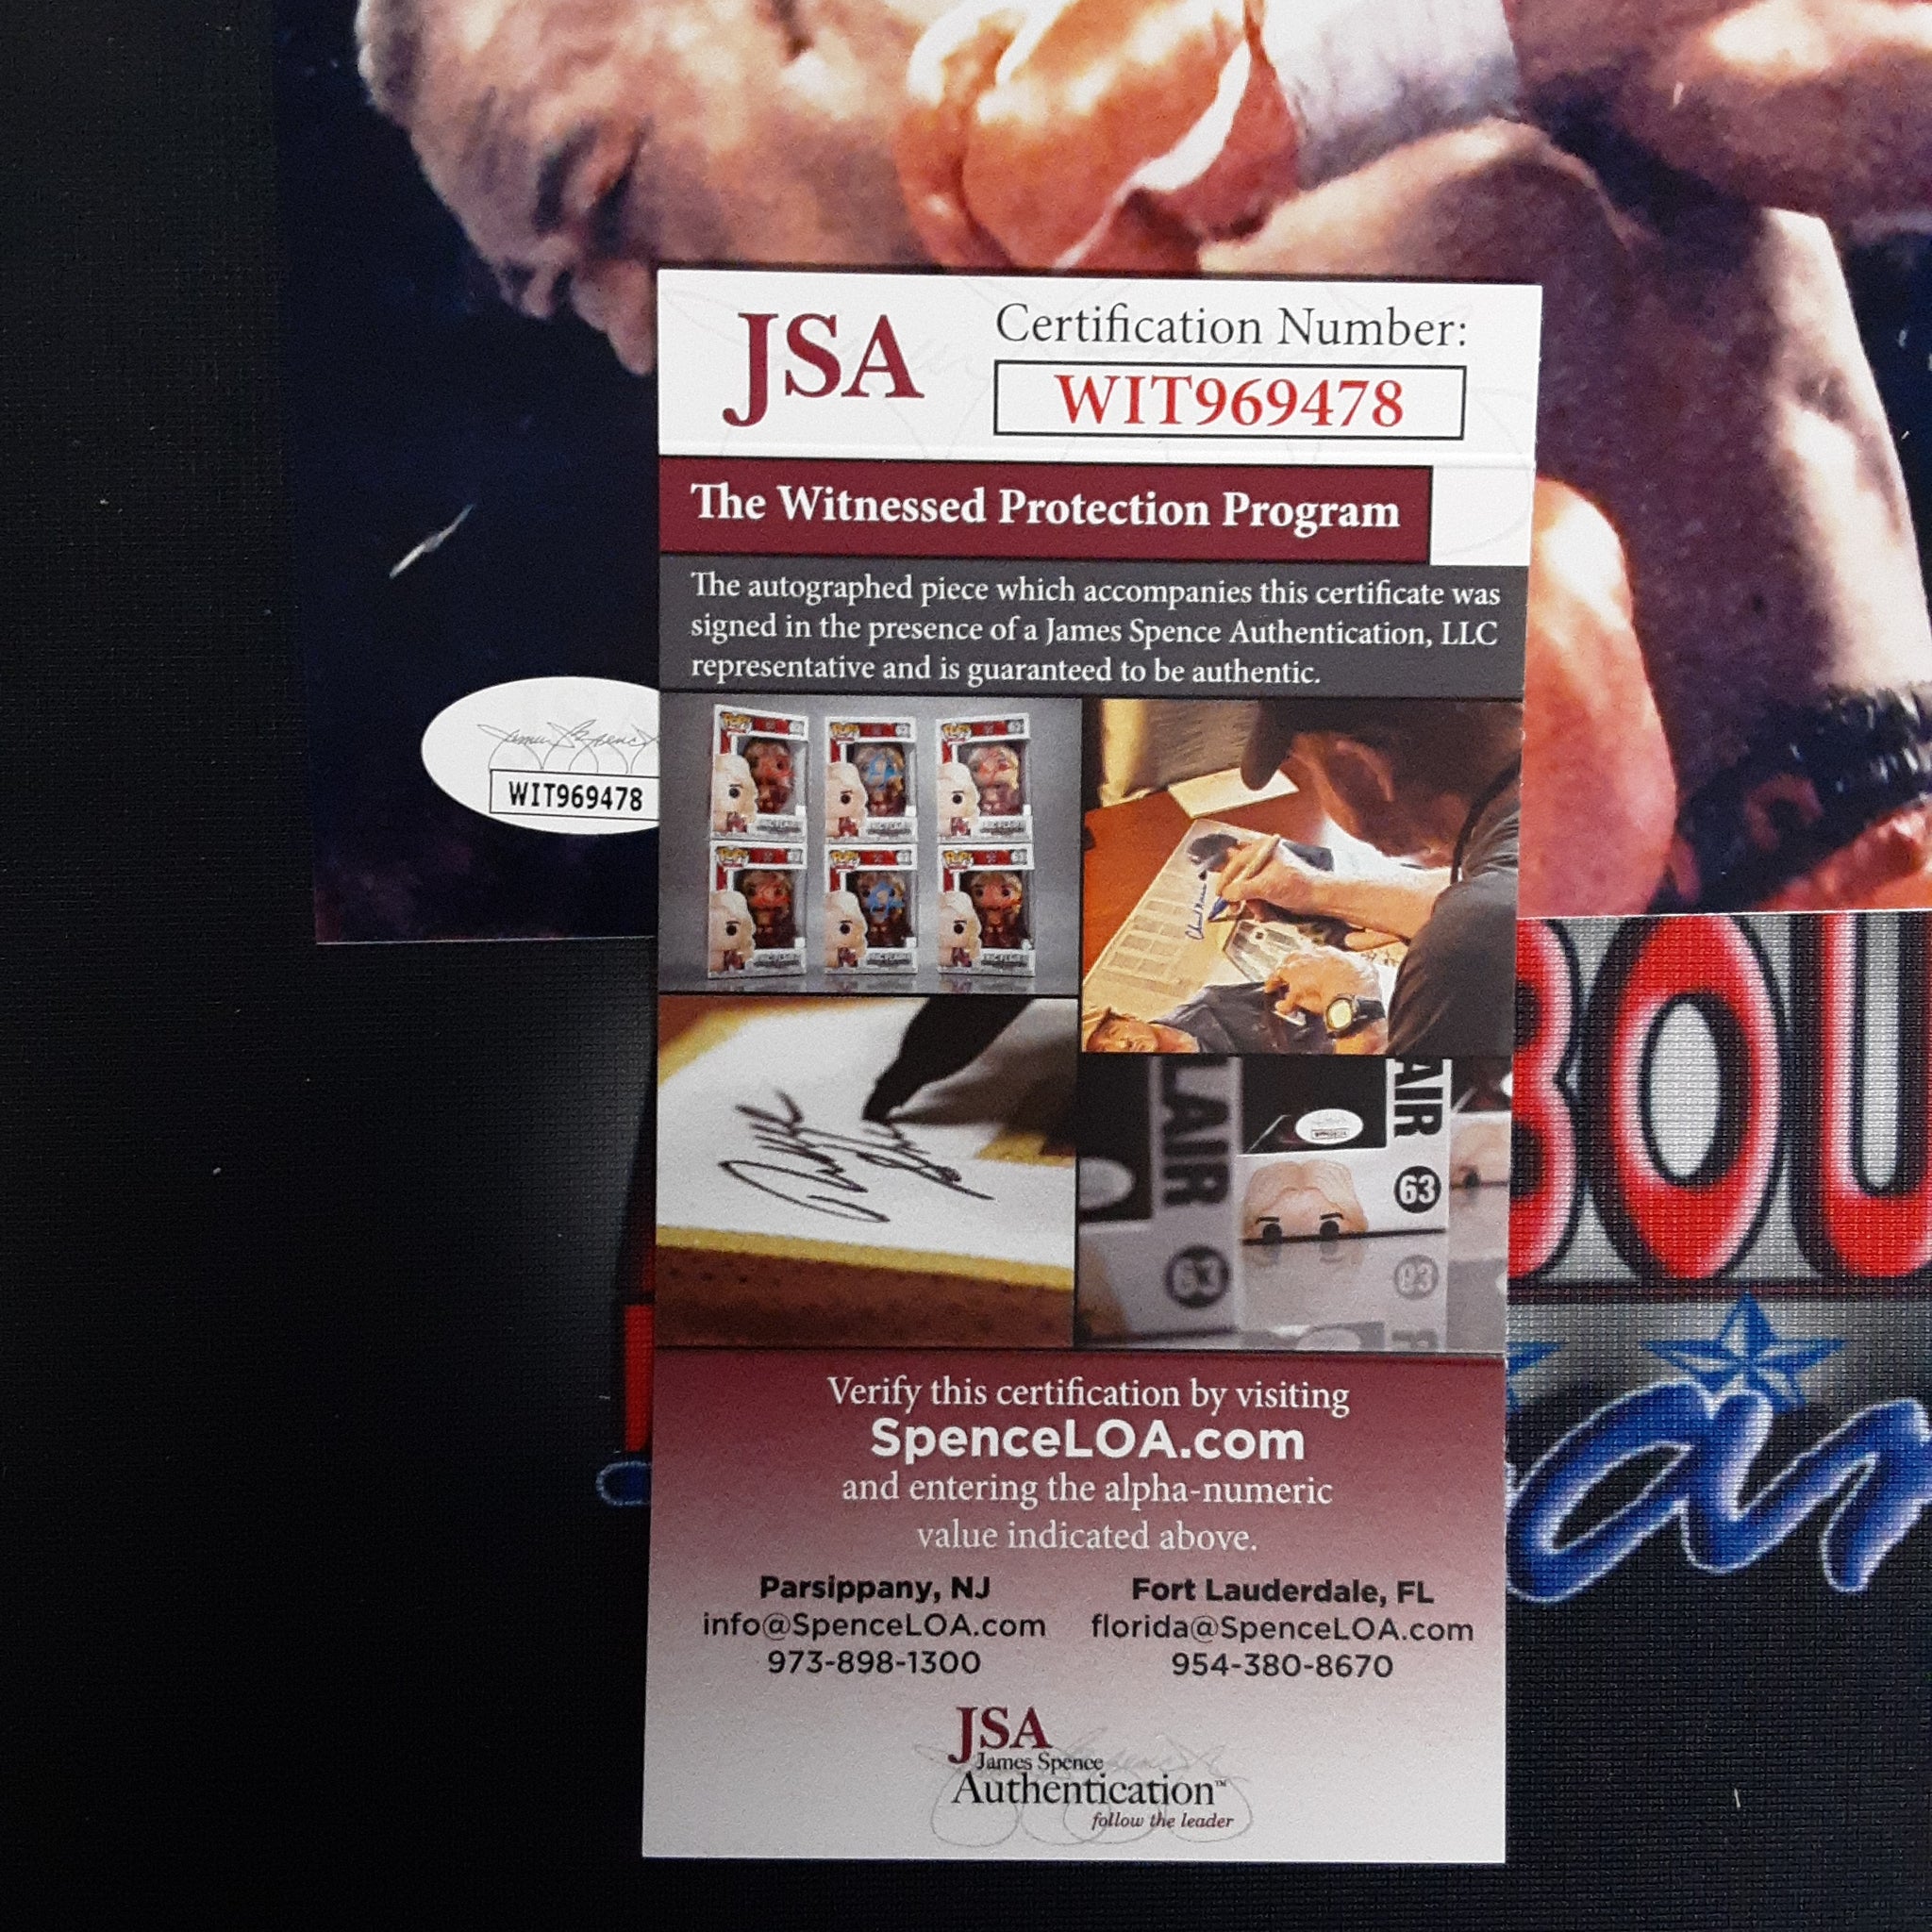 Riddick Bowe Authentic Signed 8x10 Photo Autographed with Inscription JSA.